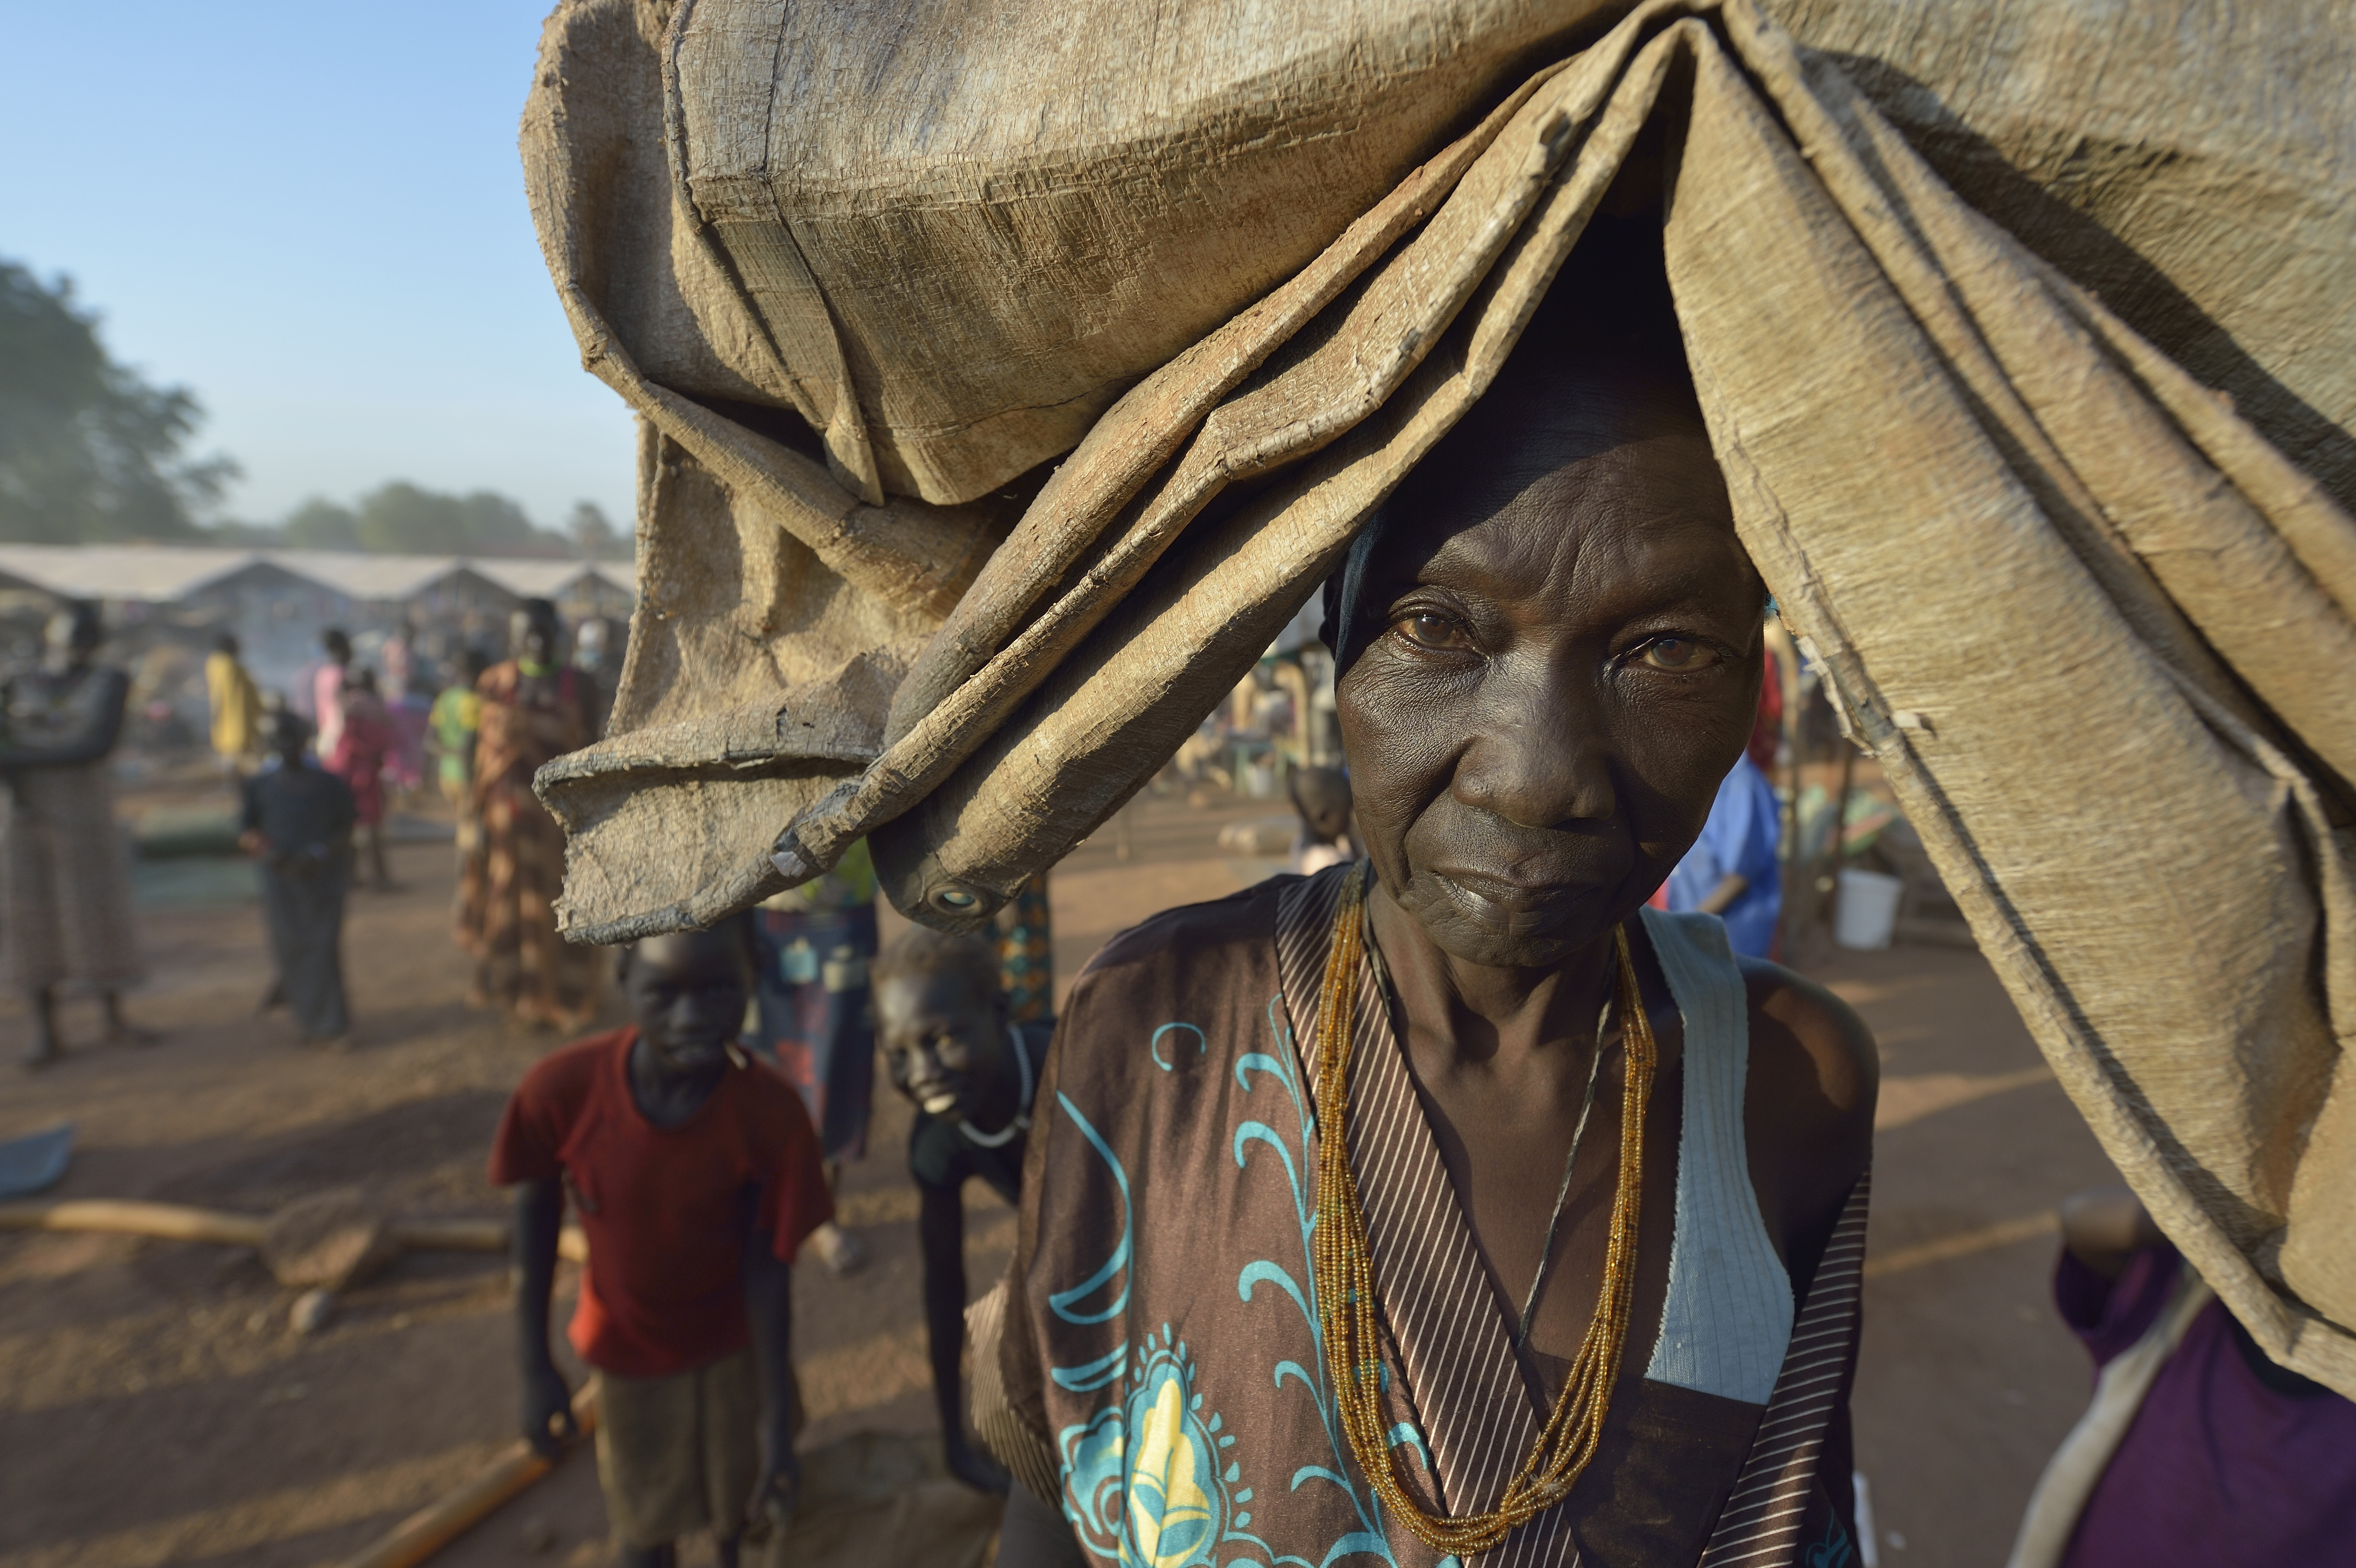 A woman carries her tarp early in the morning in a camp for over 5,000 internally displaced persons in an Episcopal Church compound in Wau, South Sudan. Most of the families here were displaced by violence early in 2017, after a larger number took refuge in other church sites when widespread armed conflict engulfed Wau in June 2016. Most of the people in this camp have no shelter, and use a tarp or mats to lay on the ground at night.